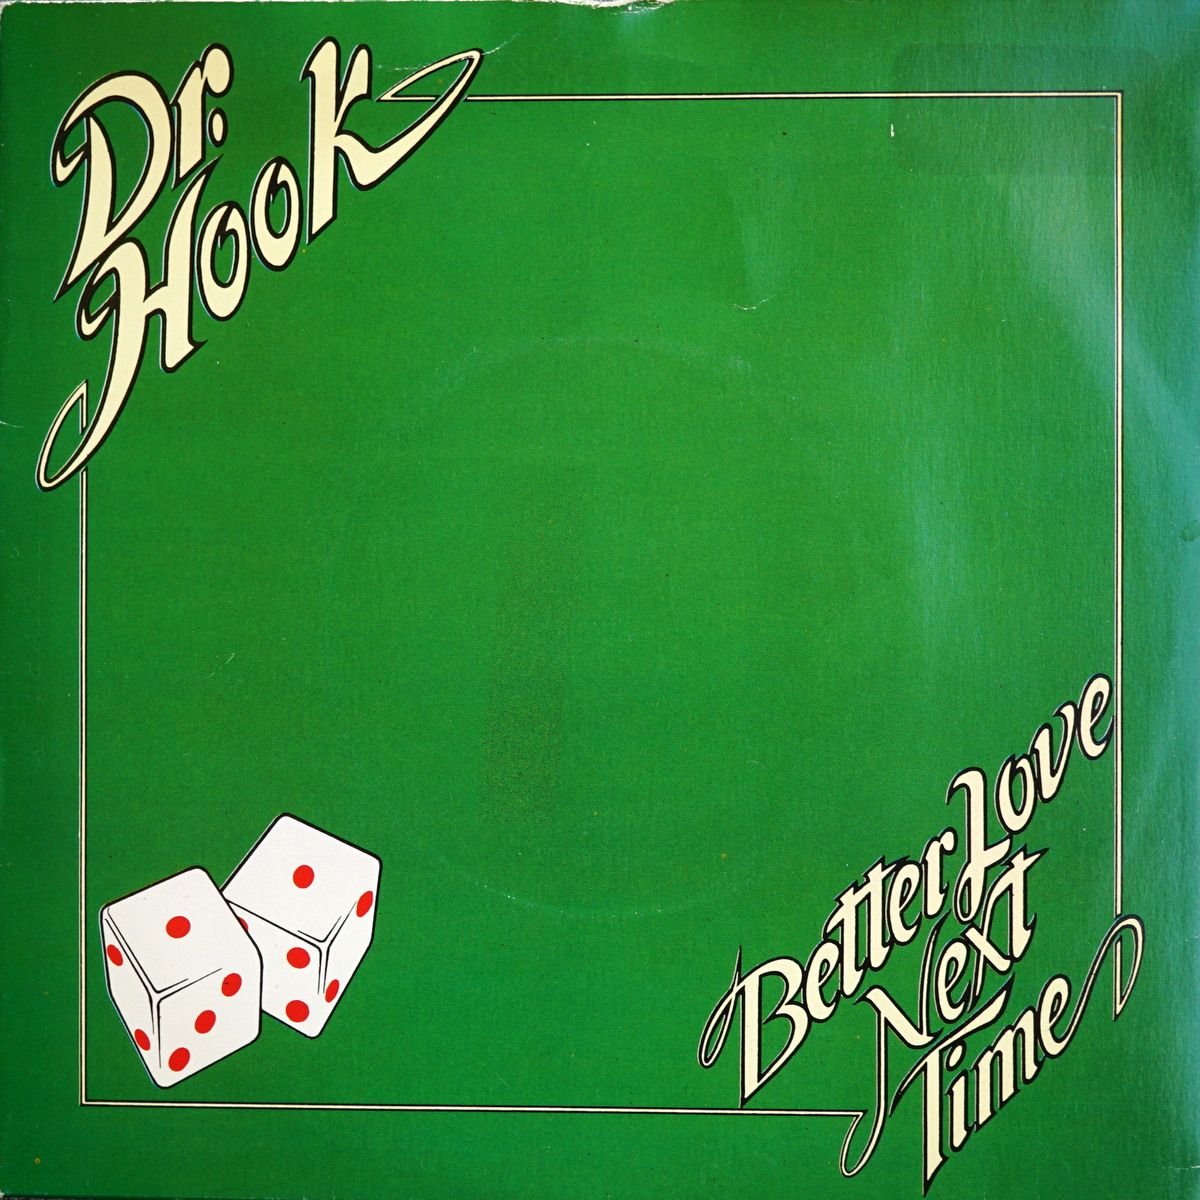 S SW A1 - CL 16112 - Better Love Next Time - 1979 - UK